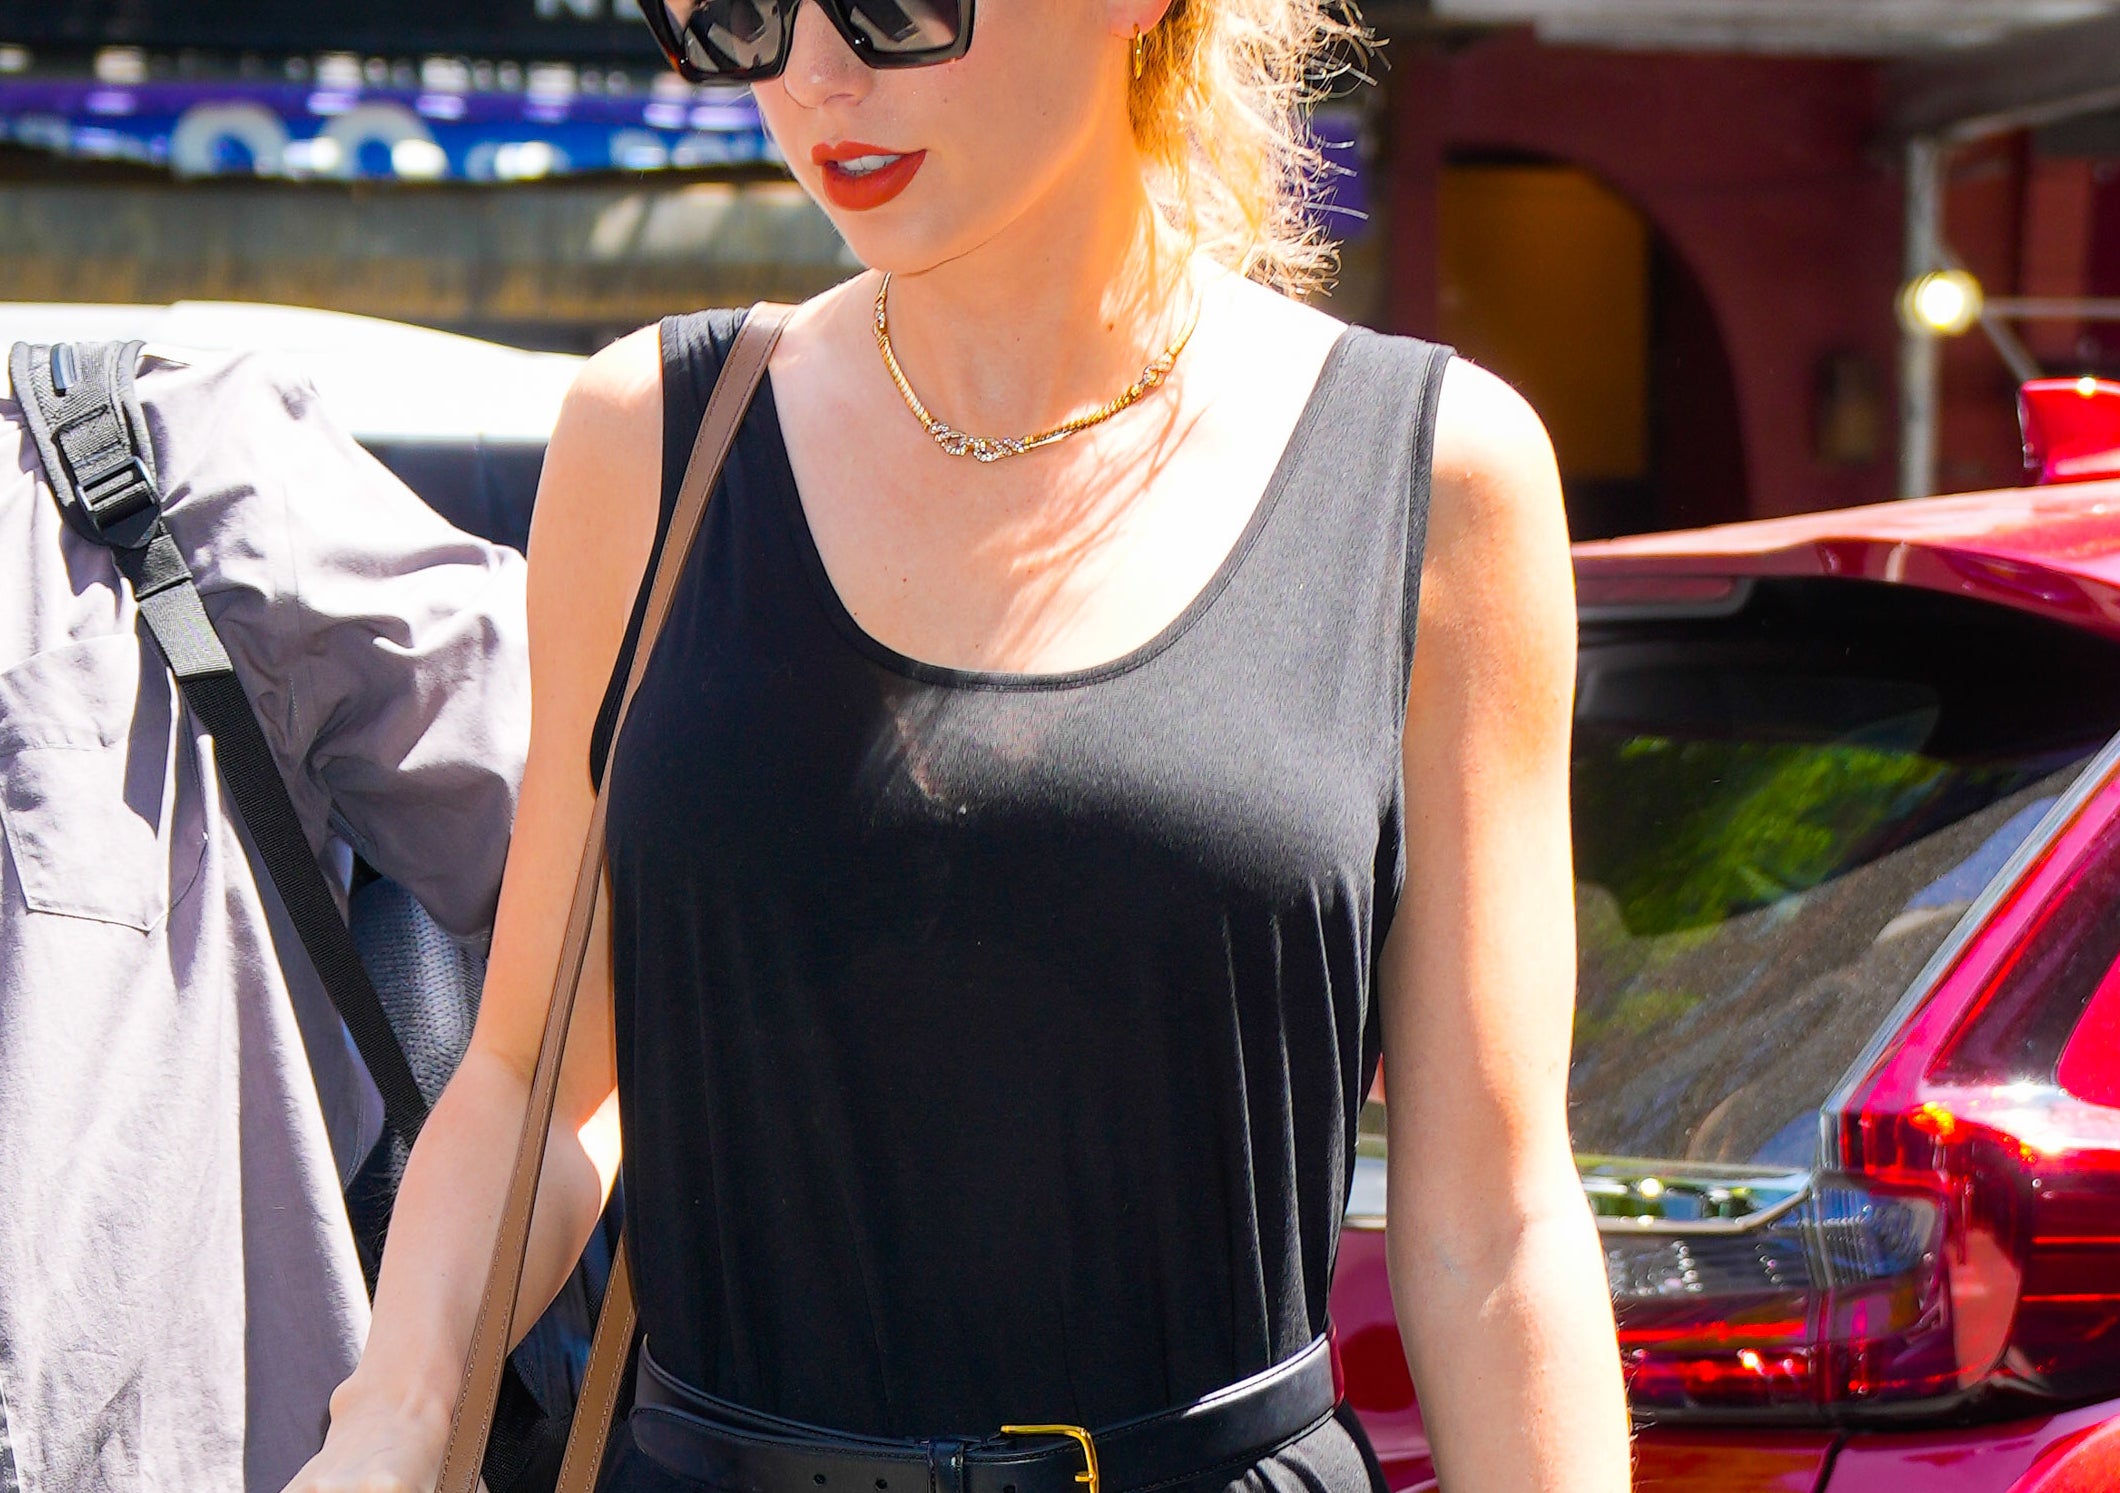 Taylor Swift walking outside in a sleeveless dress with sunglasses